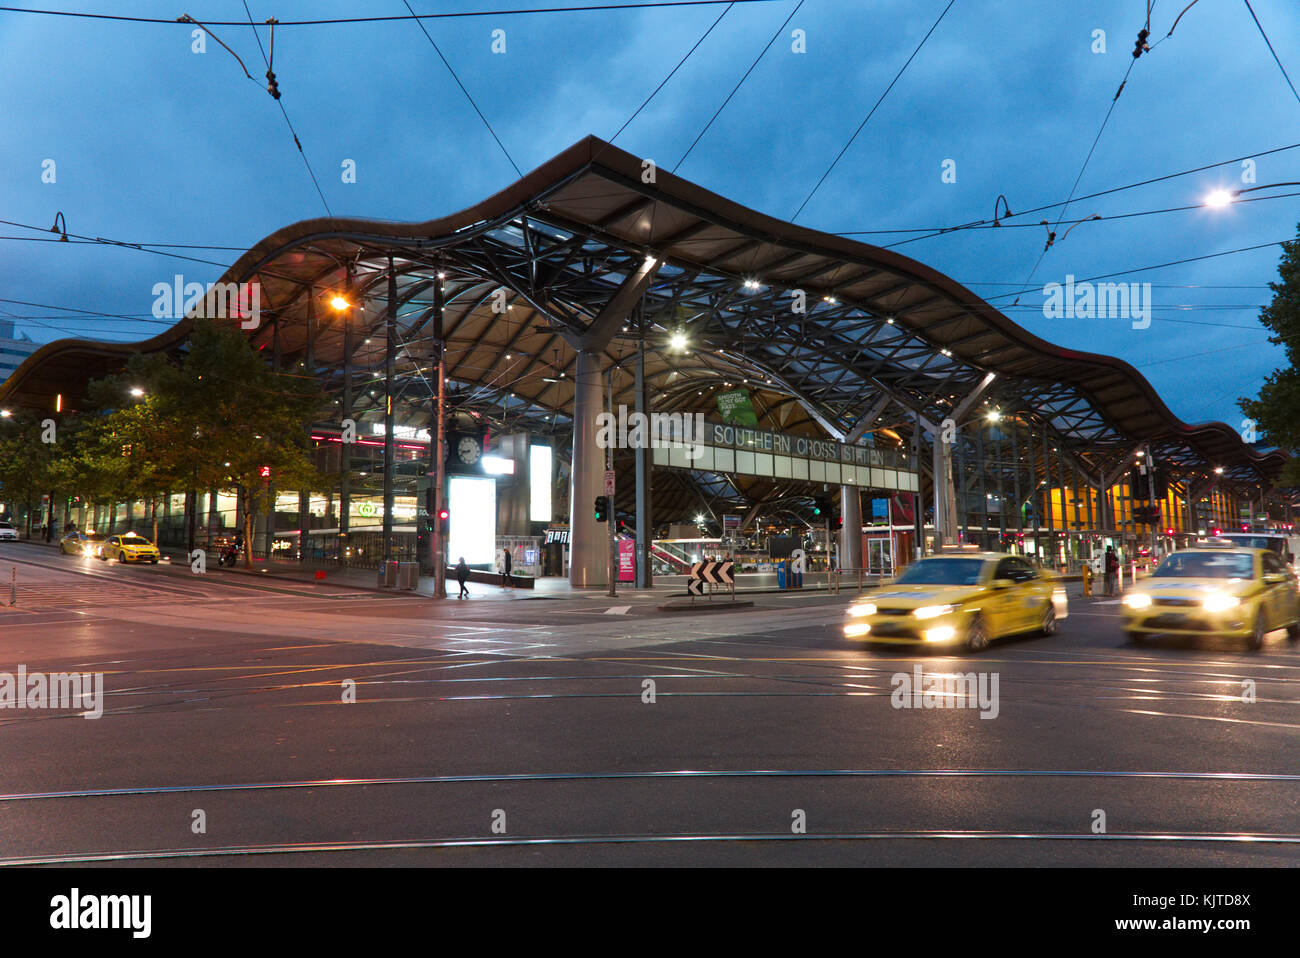 Southern Cross (formerly and still colloquially known, as Spencer Street) is a major railway station in Docklands, Melbourne. It is on Spencer Street, Stock Photo